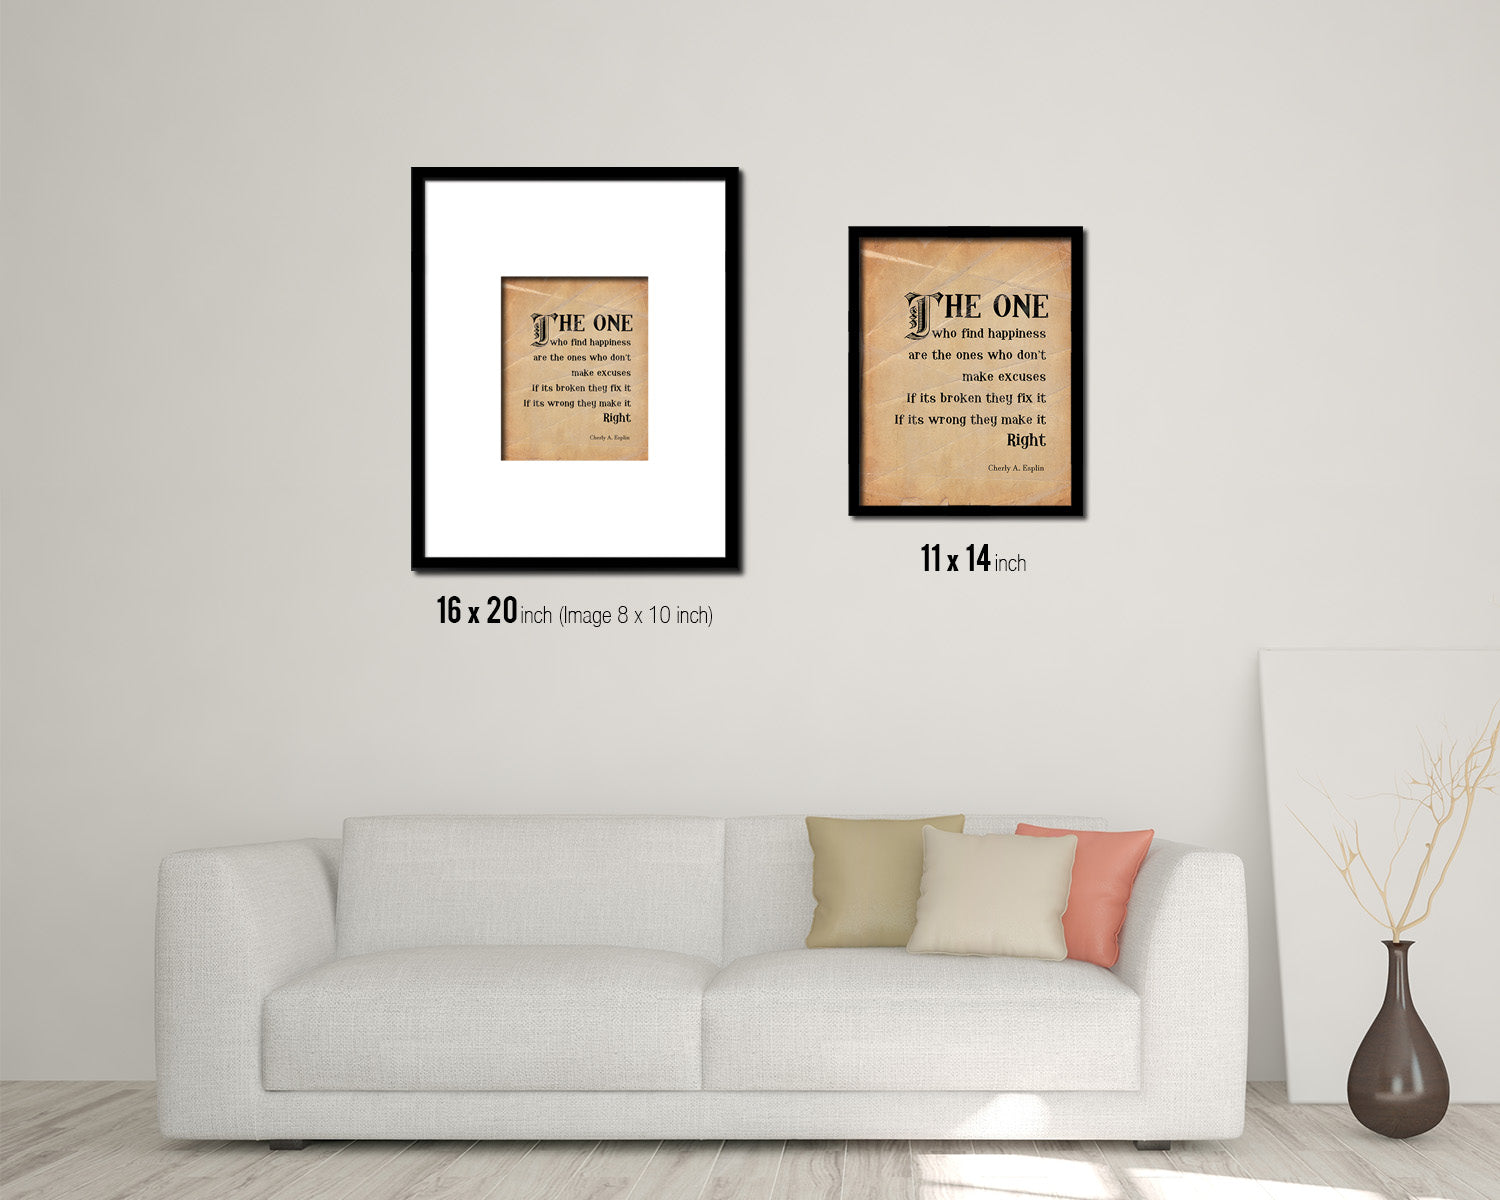 The ones who find happiness are the ones Quote Paper Artwork Framed Print Wall Decor Art